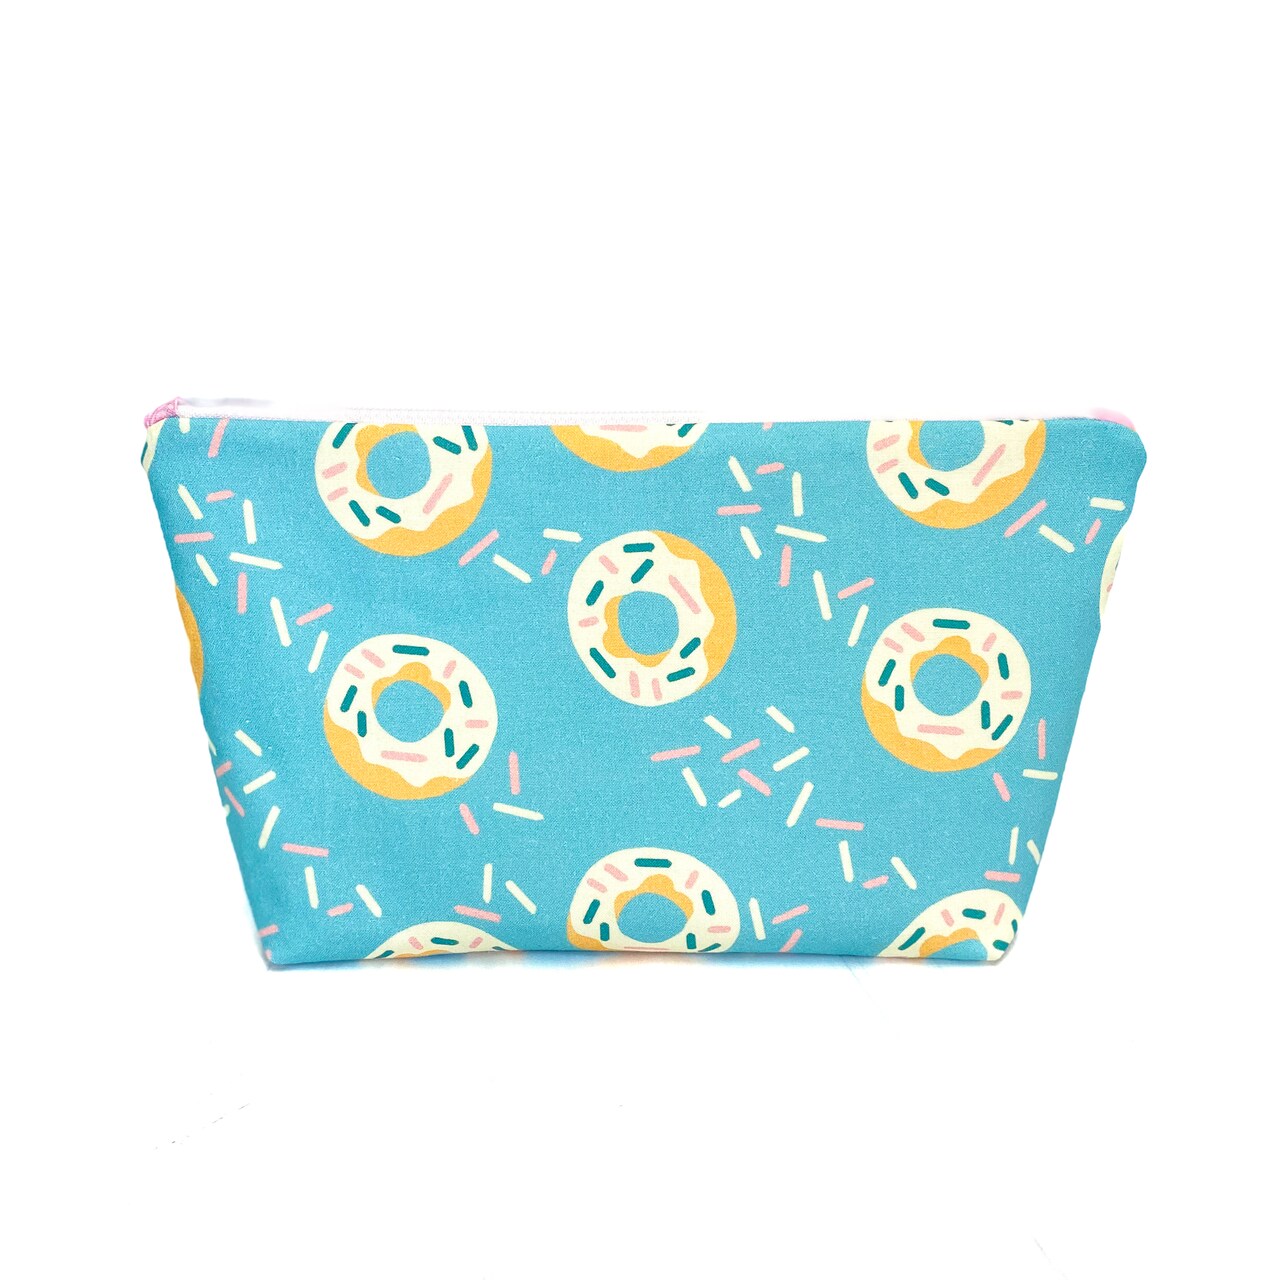 Zipper Pouch Sewing Kit - Donuts - DIY Beginner Sewing Kit